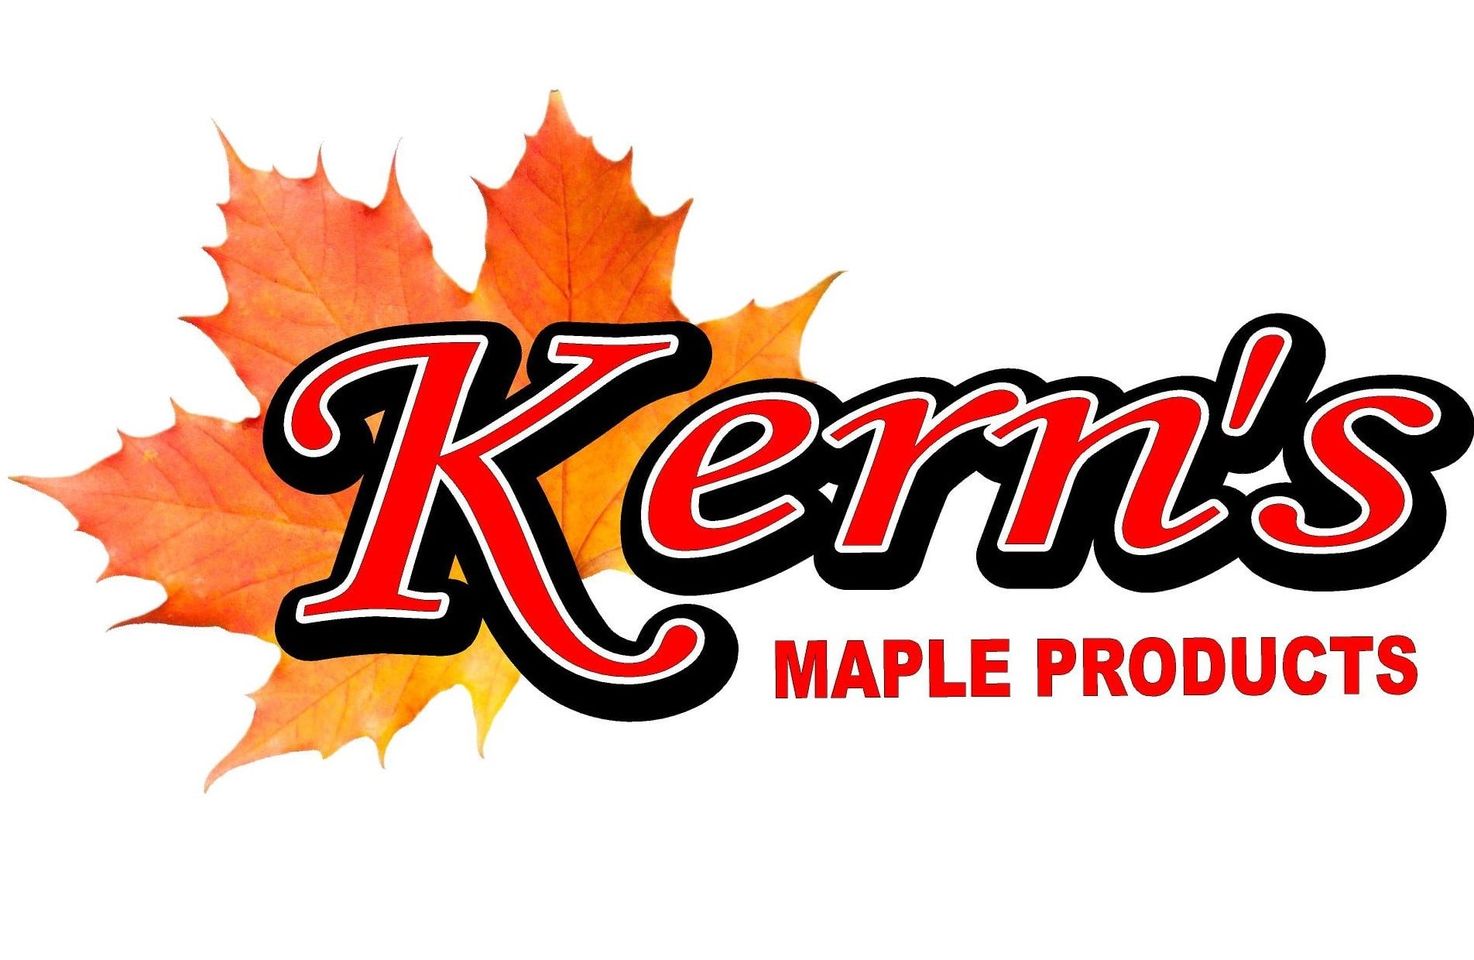 Kern's Maple Products